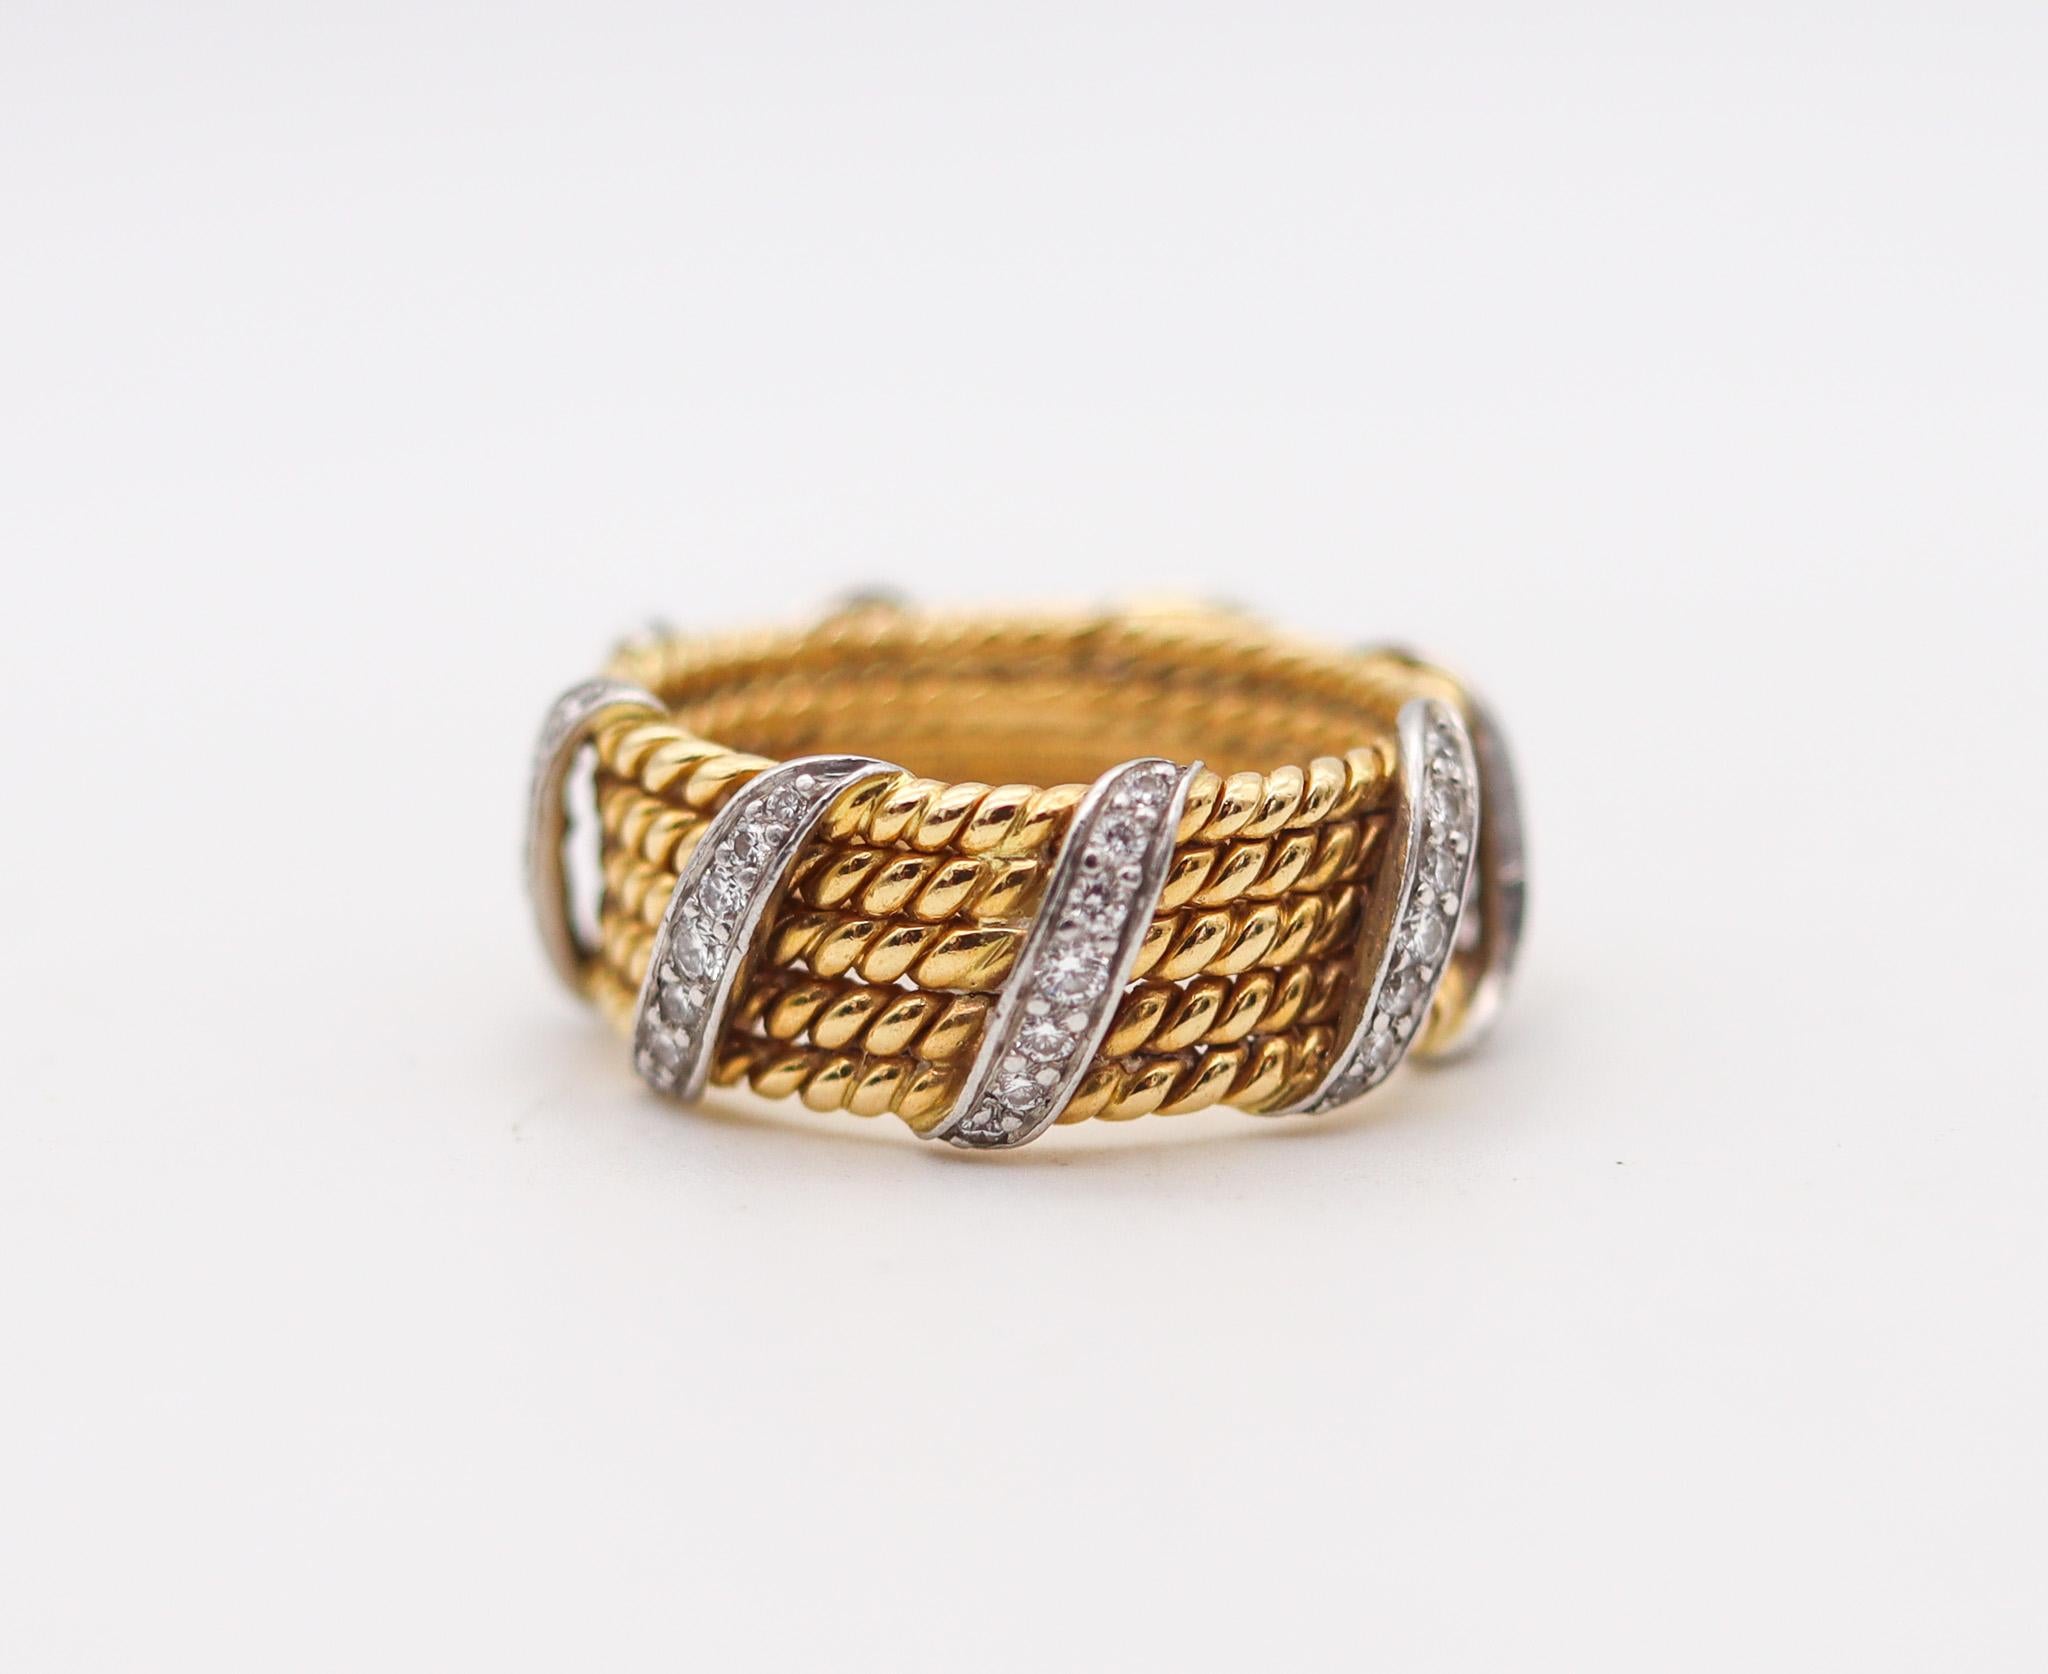 Classic ring designed by Jean Schlumberger for Tiffany & Co.

A band ring created in New York city by Jean Schlumberger for the Tiffany Studios, back in the 1970's. This iconic ring, was crafted with five row twisted ropes, made up in solid yellow